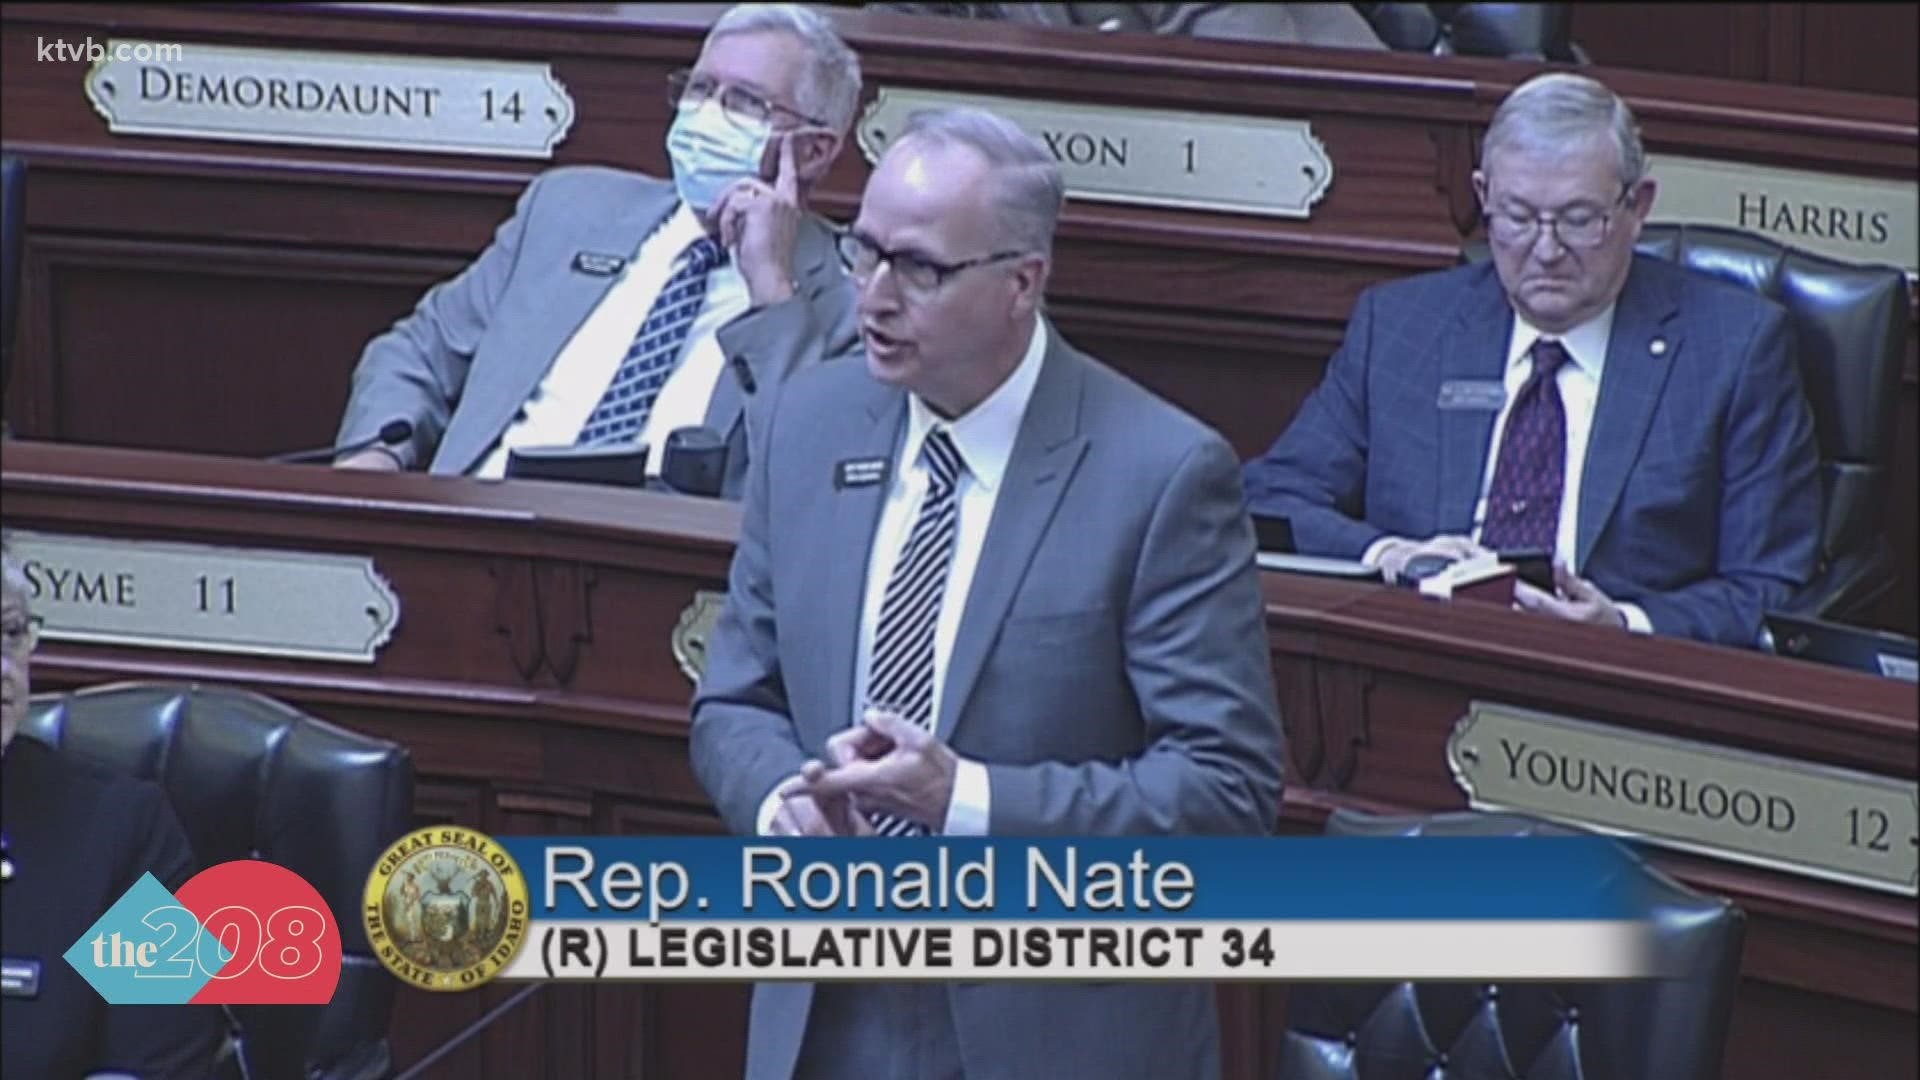 Rep. Ronald Nate attempted to get a personal bill repealing Idaho's grocery tax on the House floor Tuesday and out of the Ways and Means Committee, prompting debate.